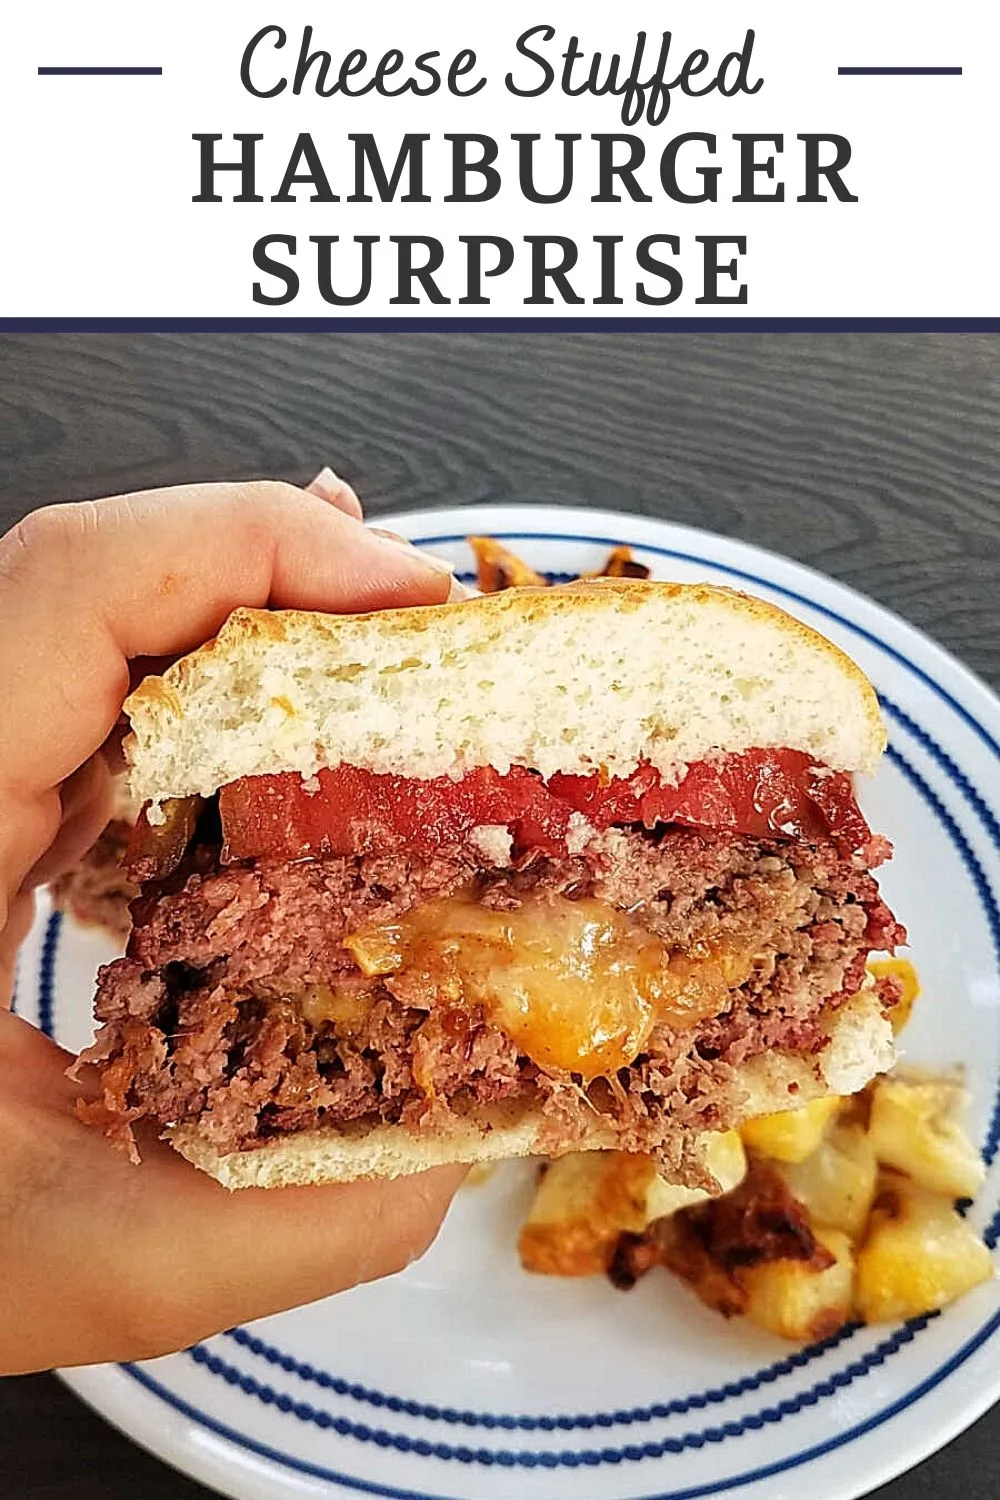 These stuffed burgers have cheese, bbq sauce and onion cooked right inside. The recipe for hamburger surprise is from my Maw-Maw and has been enjoyed for generations.